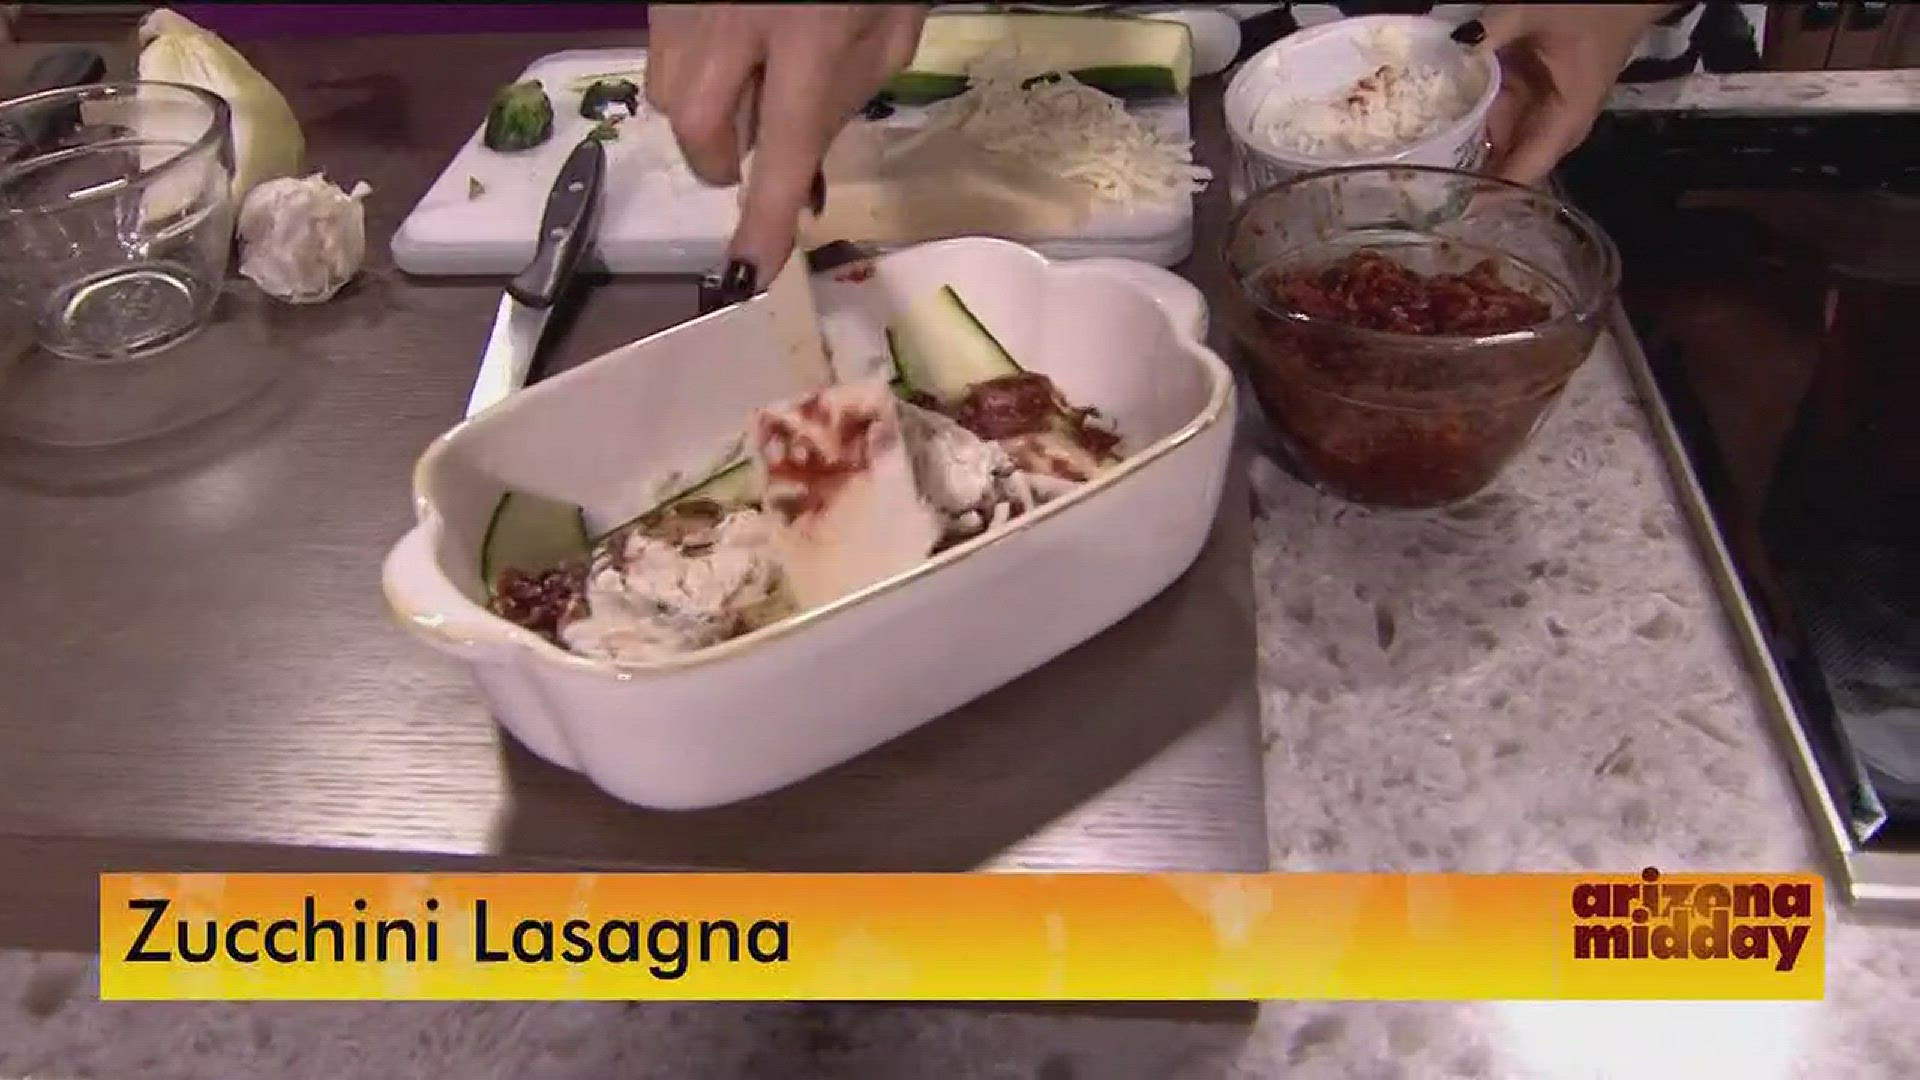 Low lasagna but want to cut down on carbs? Chef Trudy Maples has a recipe for zucchini lasagna to try.